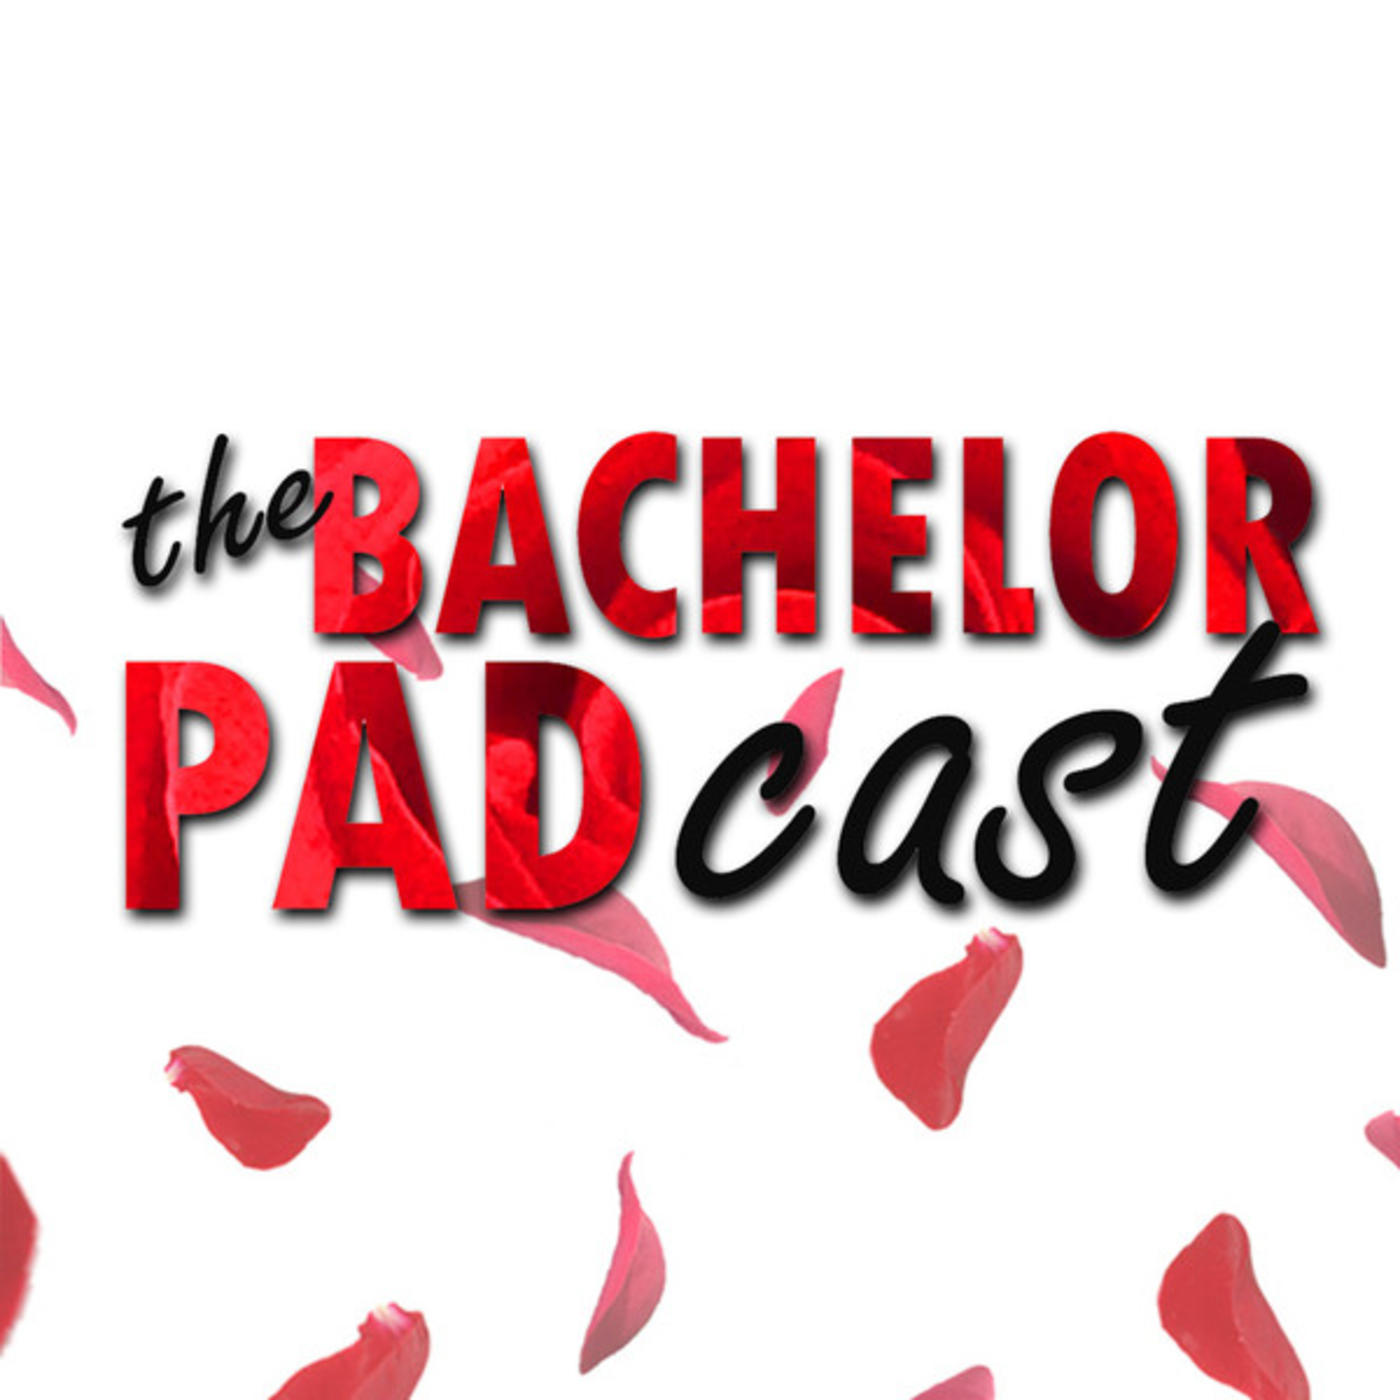 The Bachelorette - Final Rose and Bachelor Front-Runners